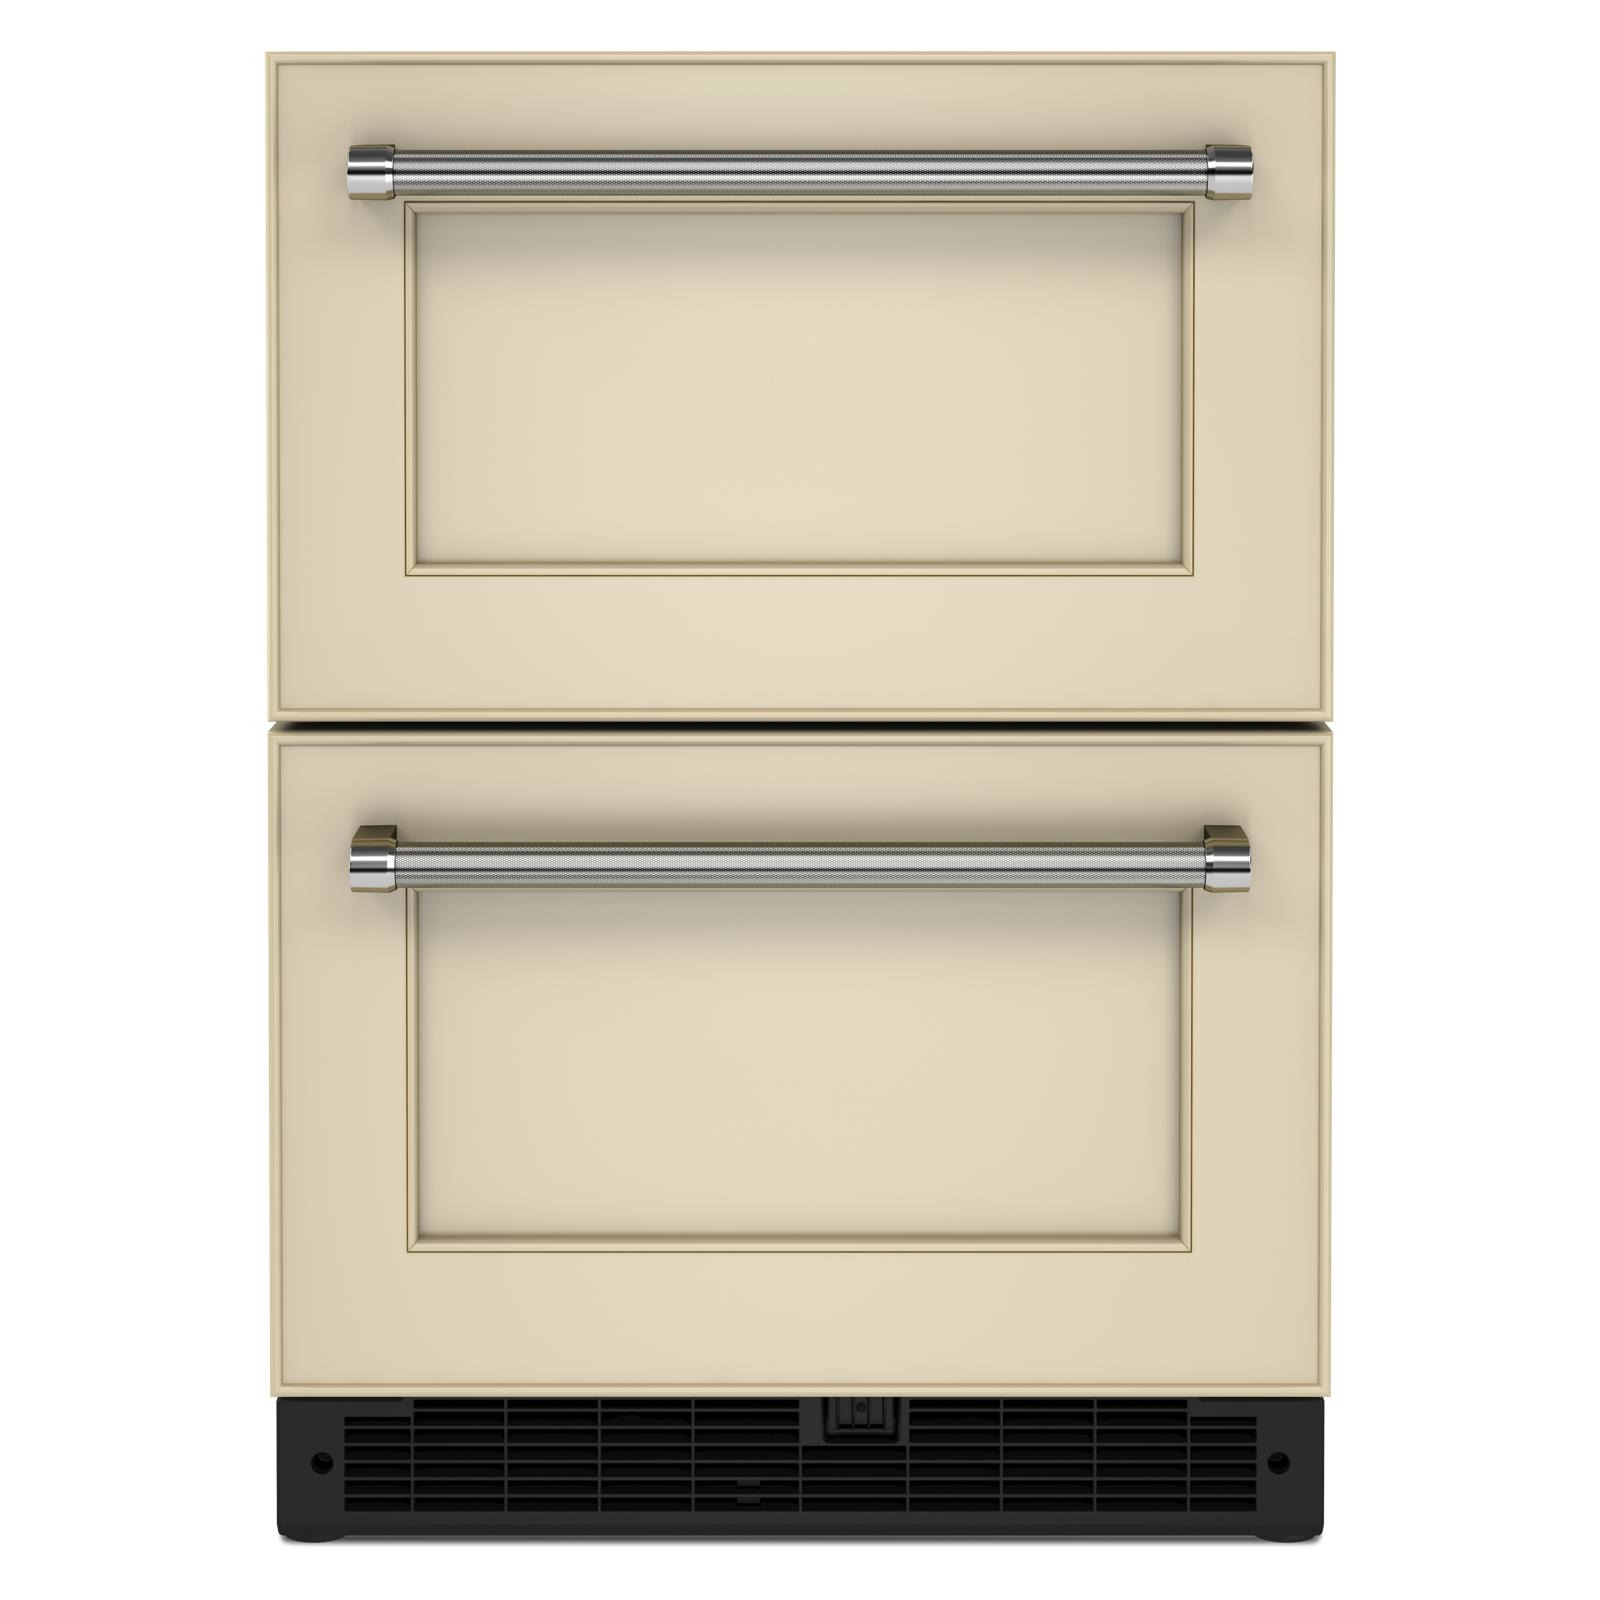 KitchenAid - 23.875 Inch 4.4 cu. ft Undercounter Double-Drawer Refrigerator in Panel Ready - KUDR204KPA